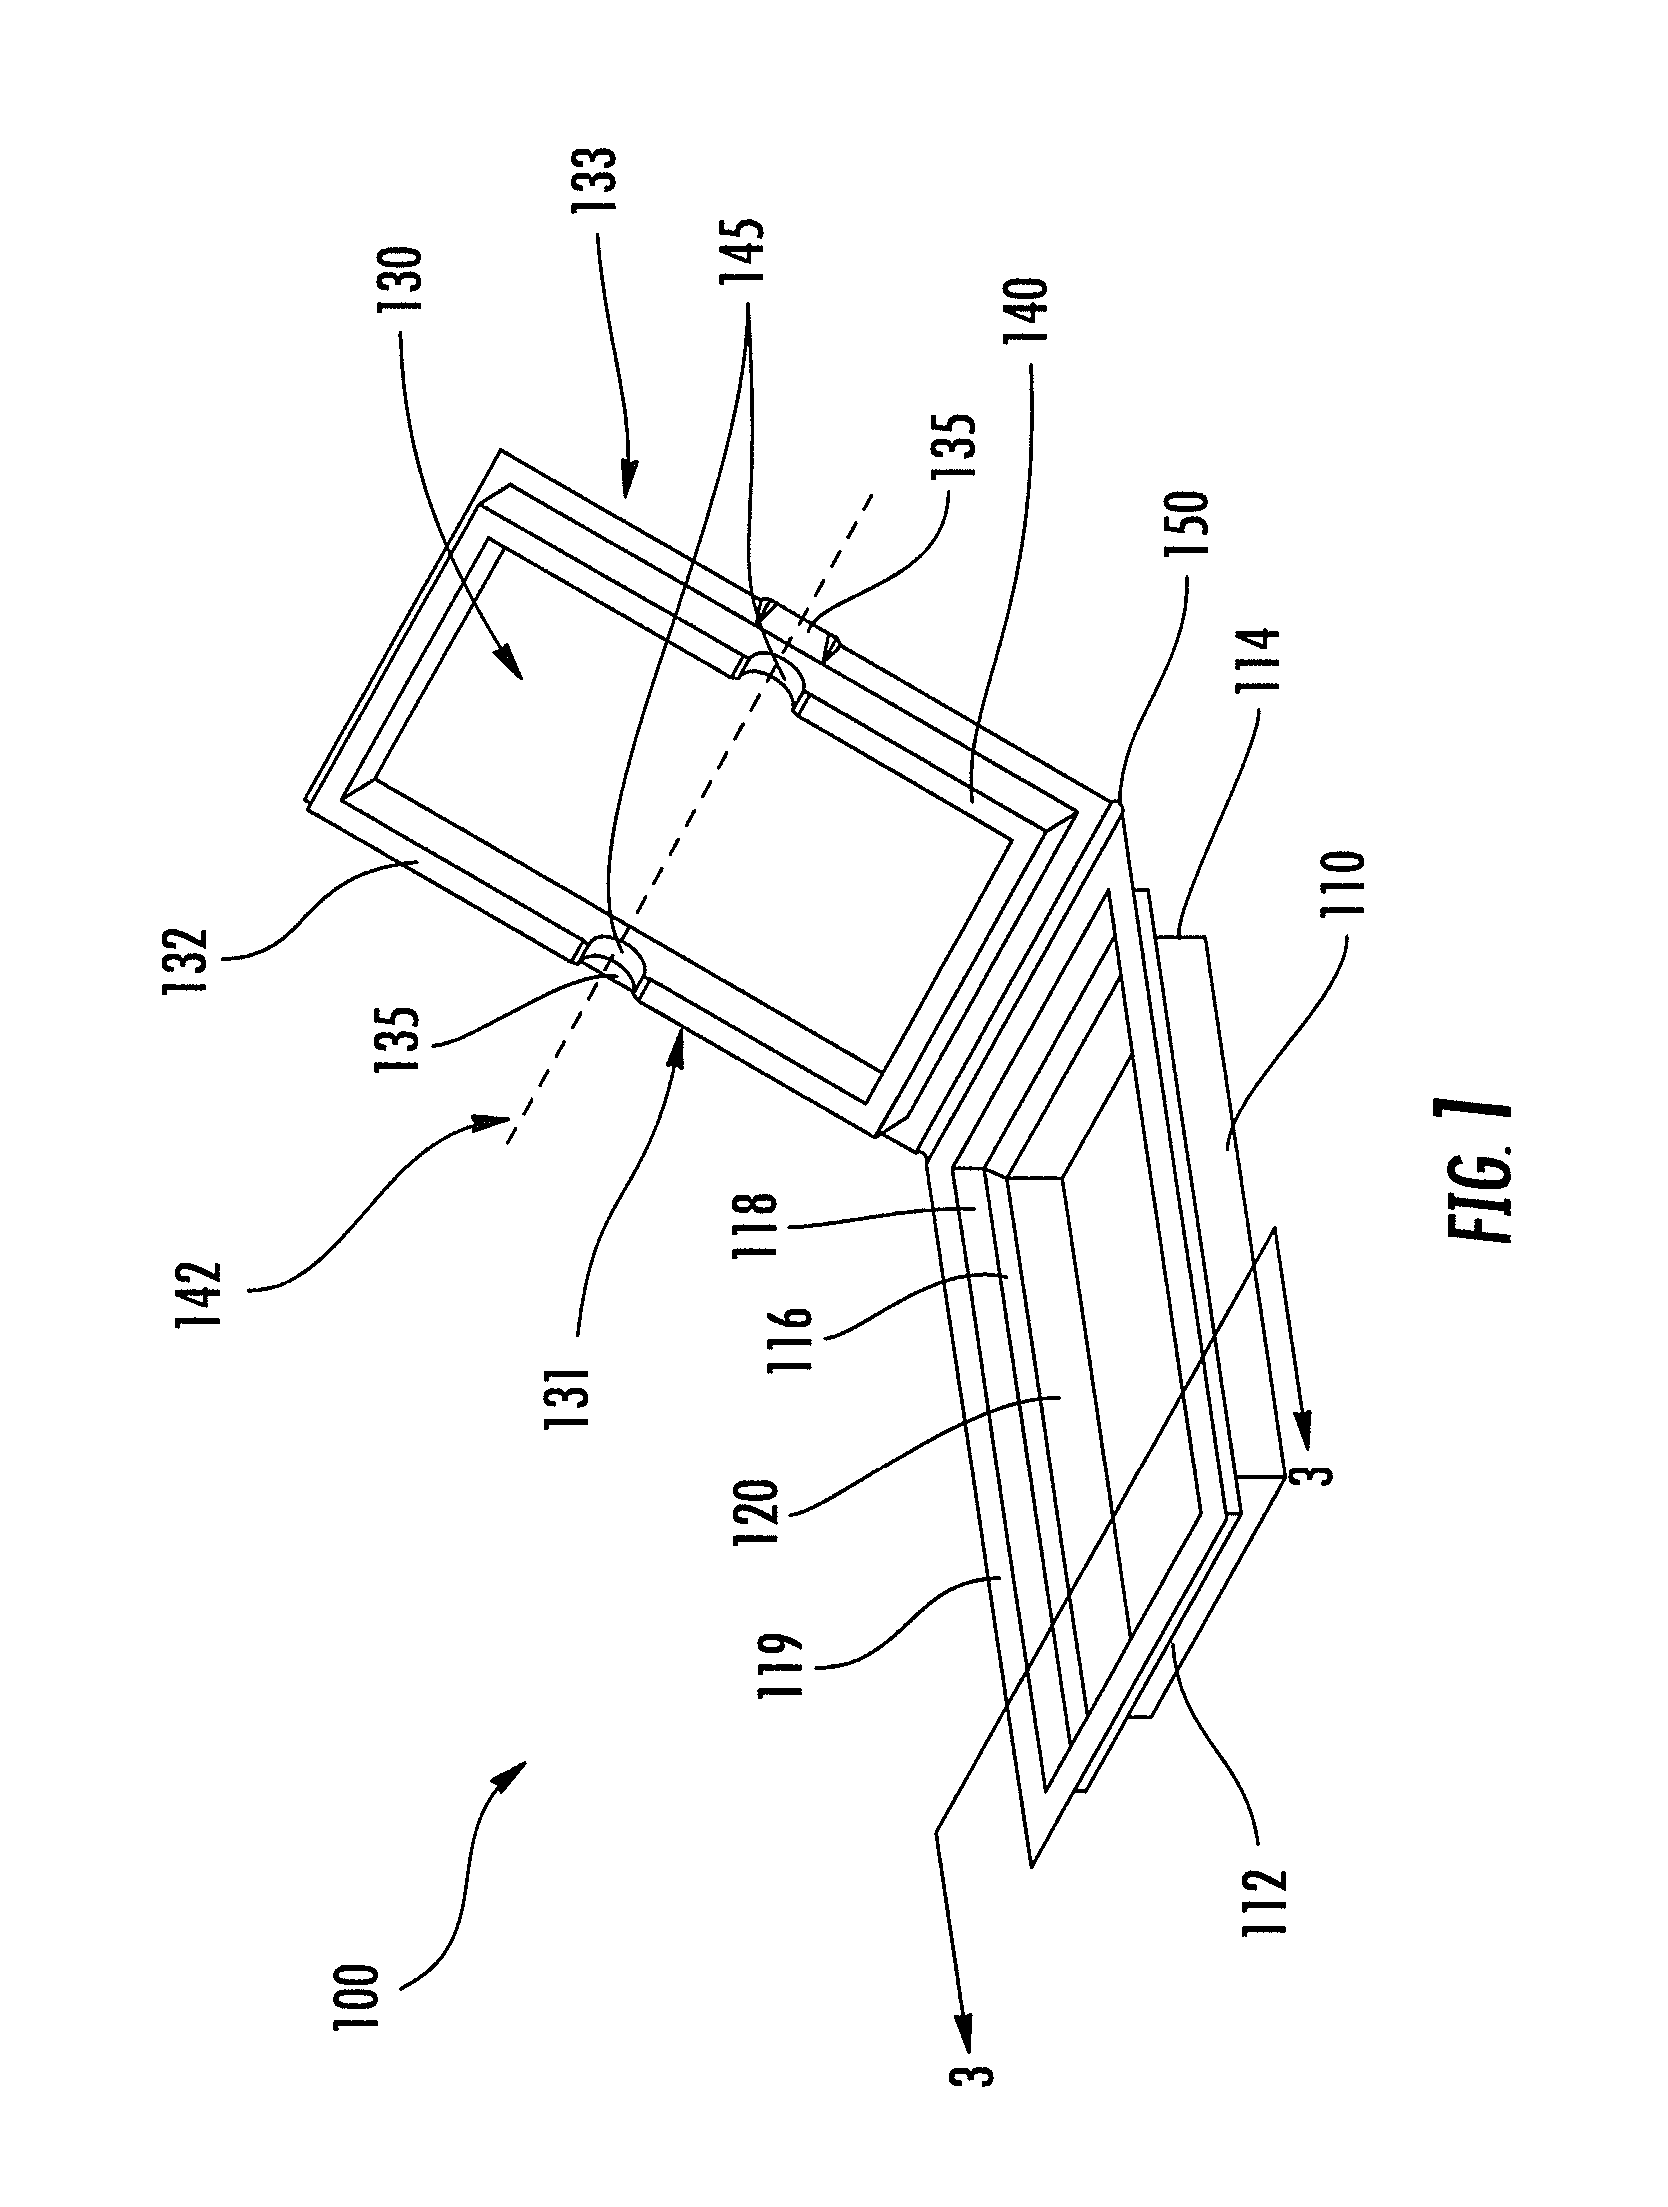 Buckling clamshell container for automated aliquot and dispersal processes